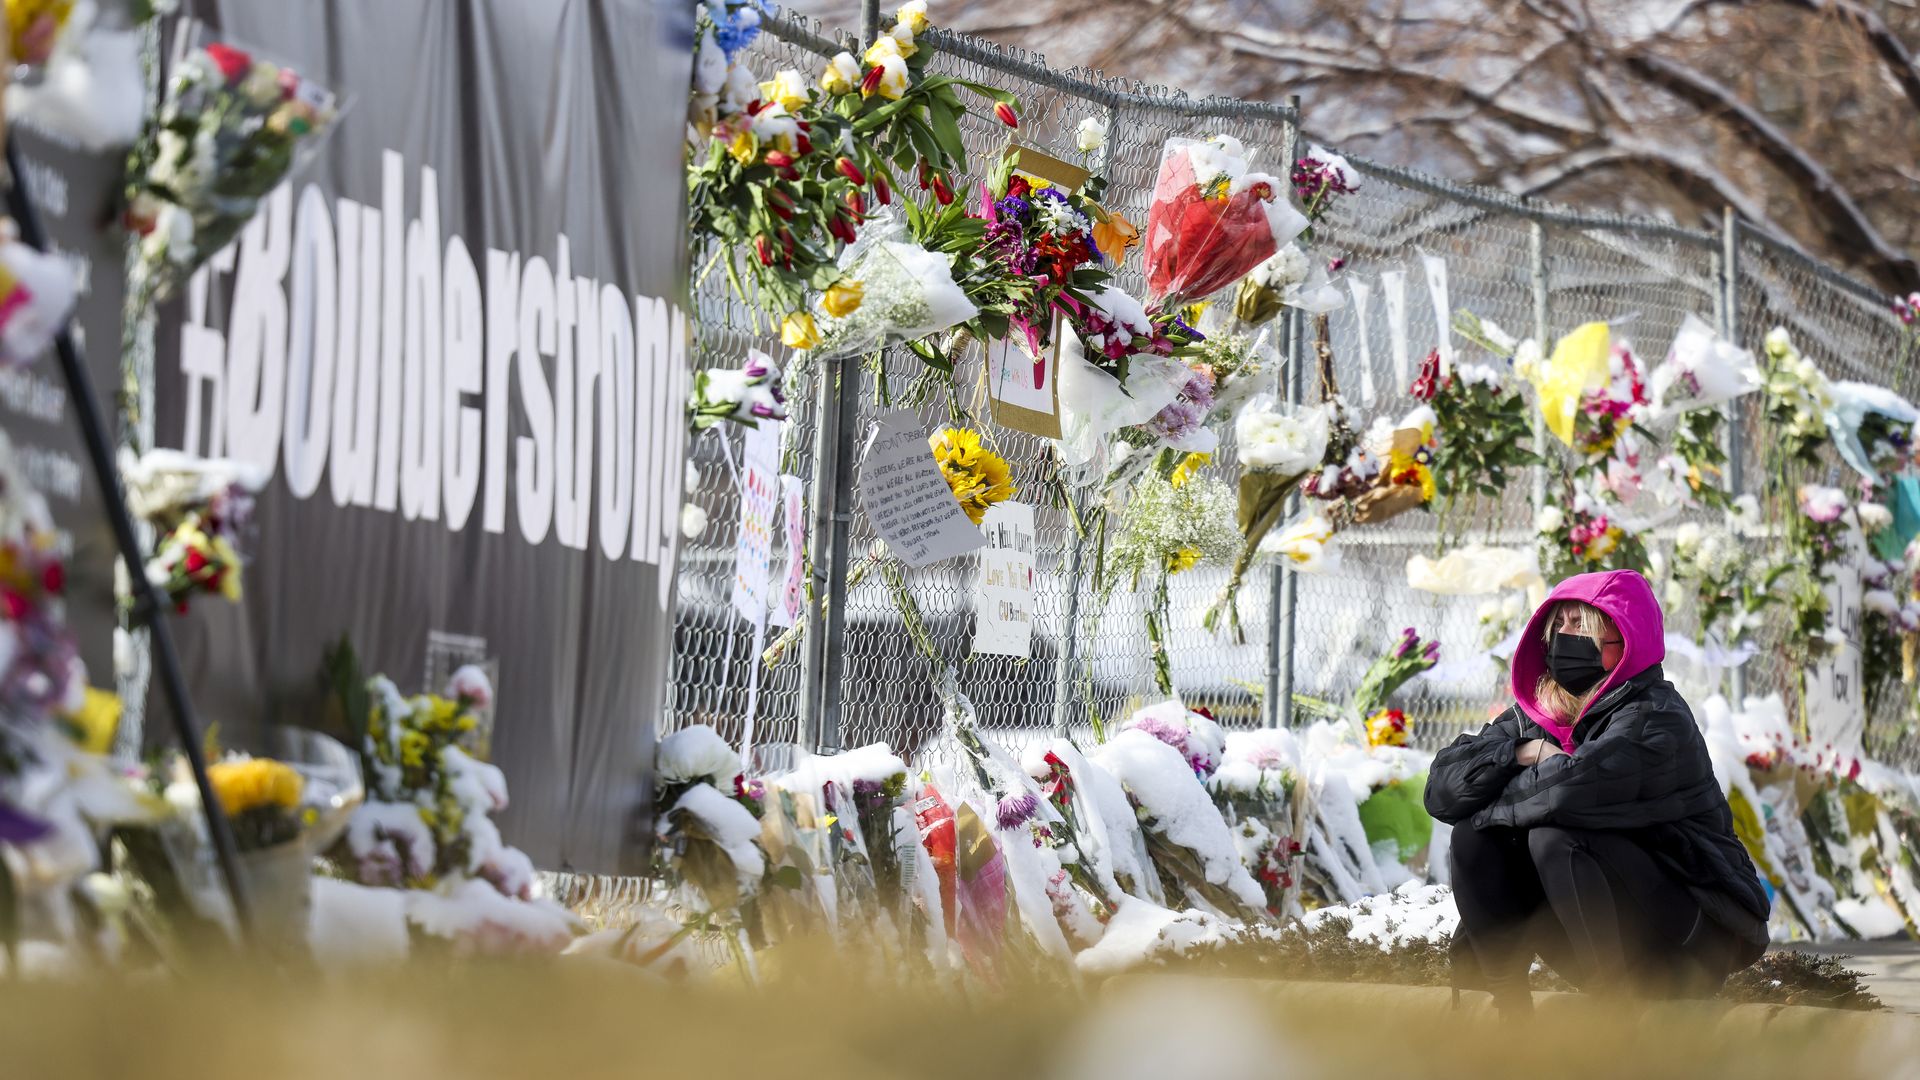 Gianna Giorlando sits next to a makeshift memorial for the victims of a mass shooting outside a King Soopers grocery store on March 24, 2021 